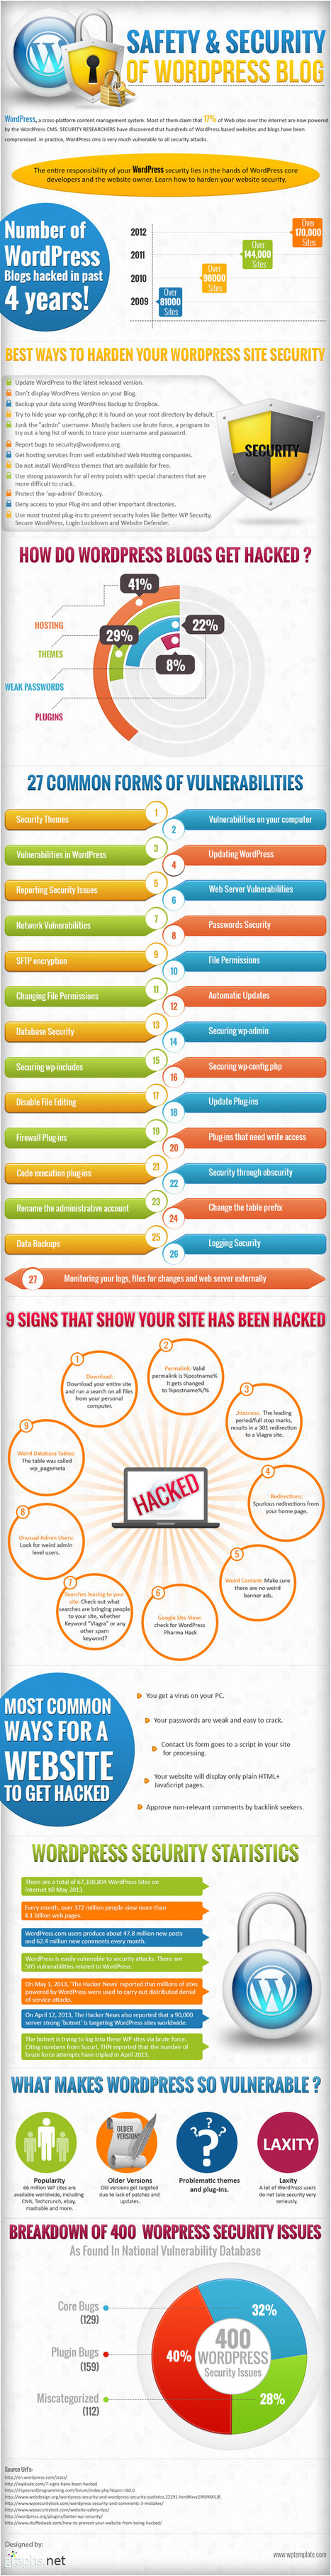 Safety and Security of WordPress Blog (Infographic) | Daily Magazine | Scoop.it